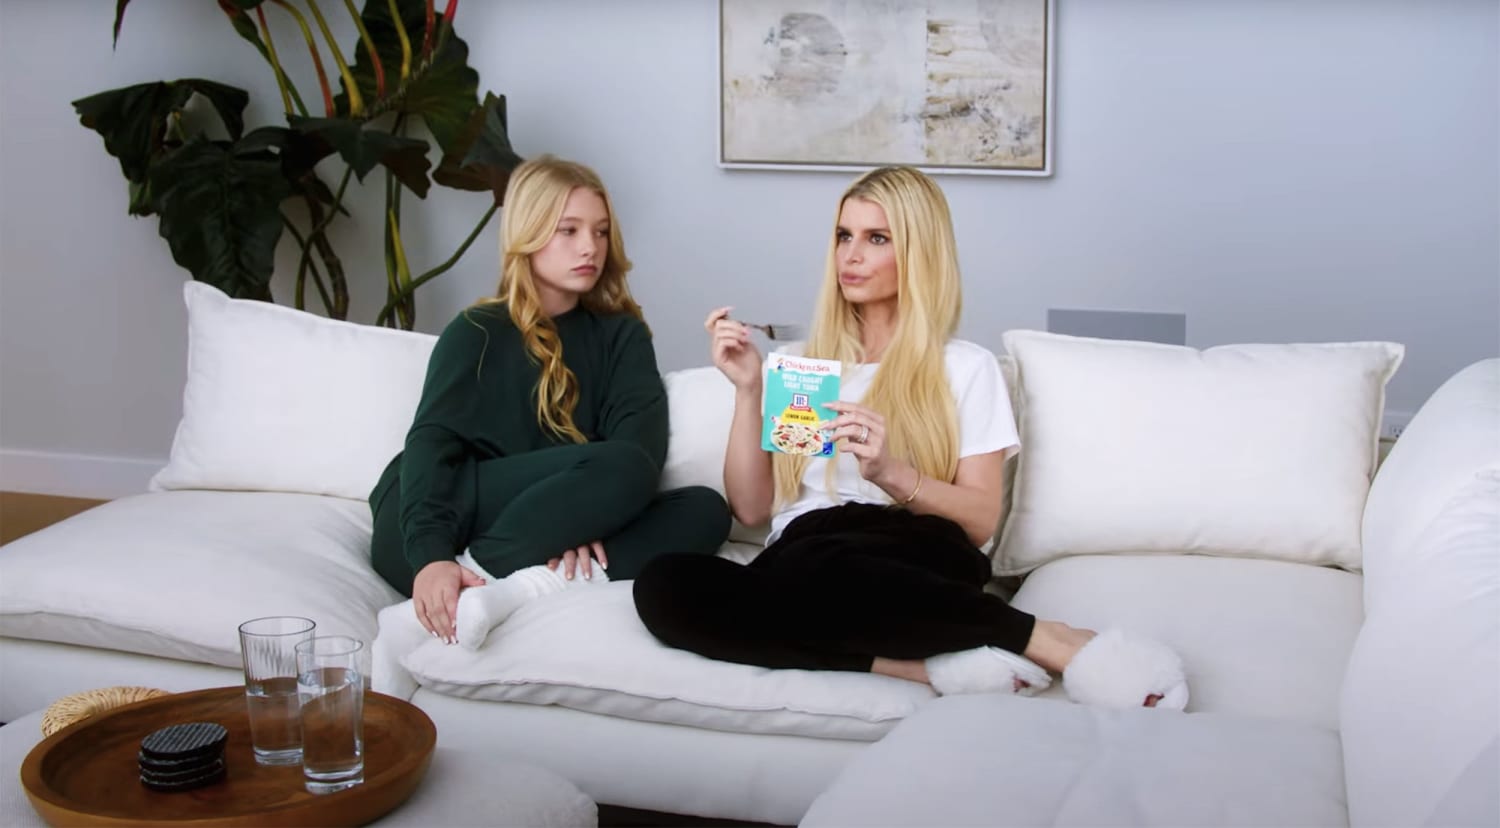 Jessica Simpson and her preteen daughter revisit 'Chicken of the Sea' moment in new commercial